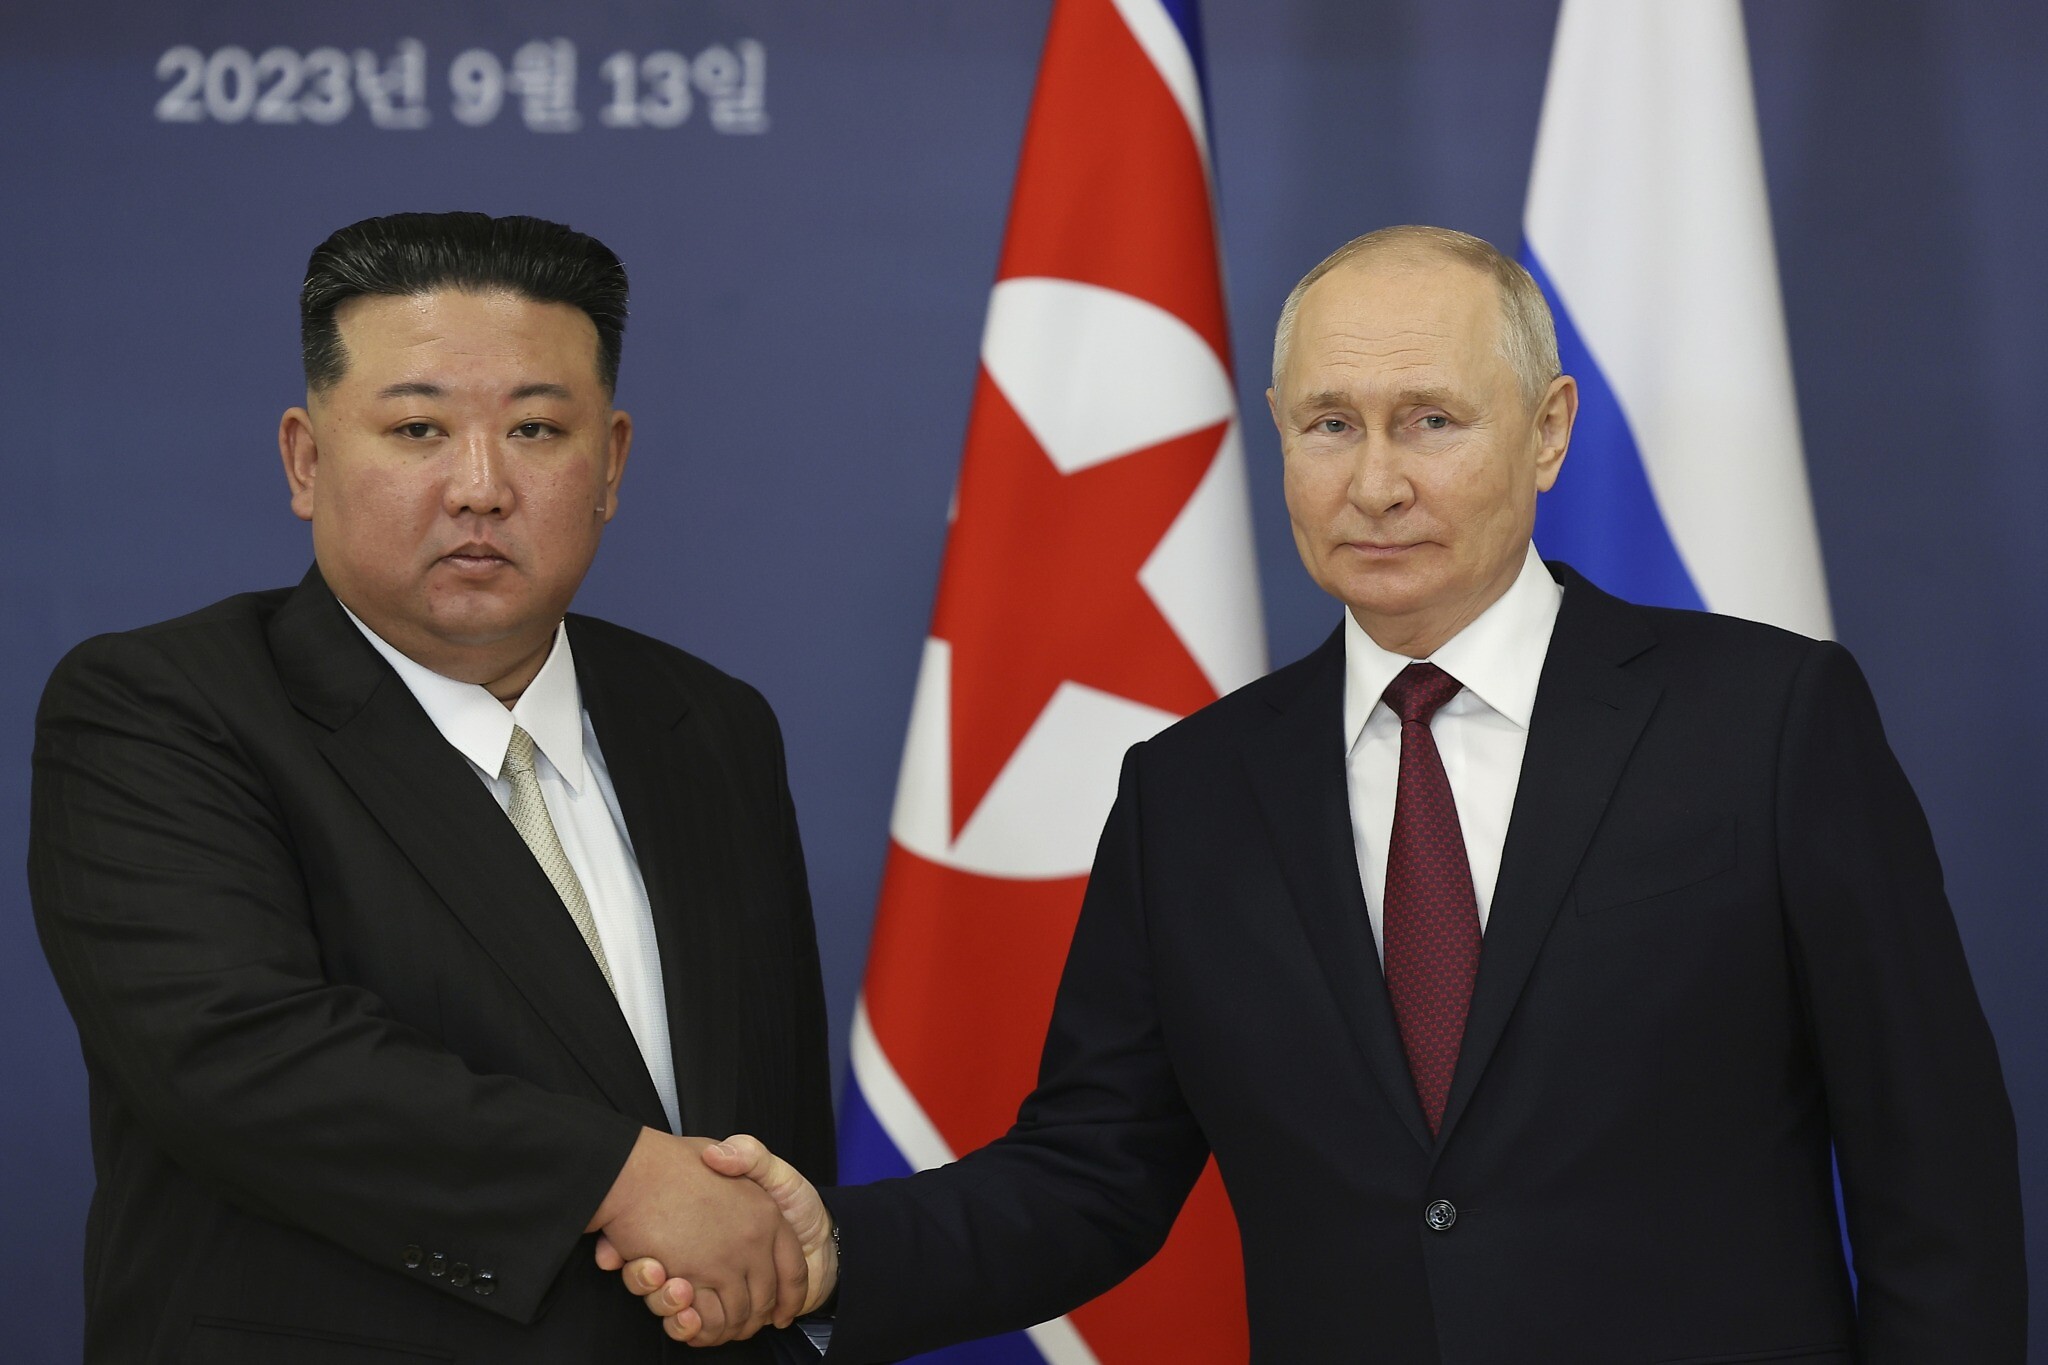 Putin meets with Kim Jong Un in North Korea to garner support for Ukraine  war | The Times of Israel